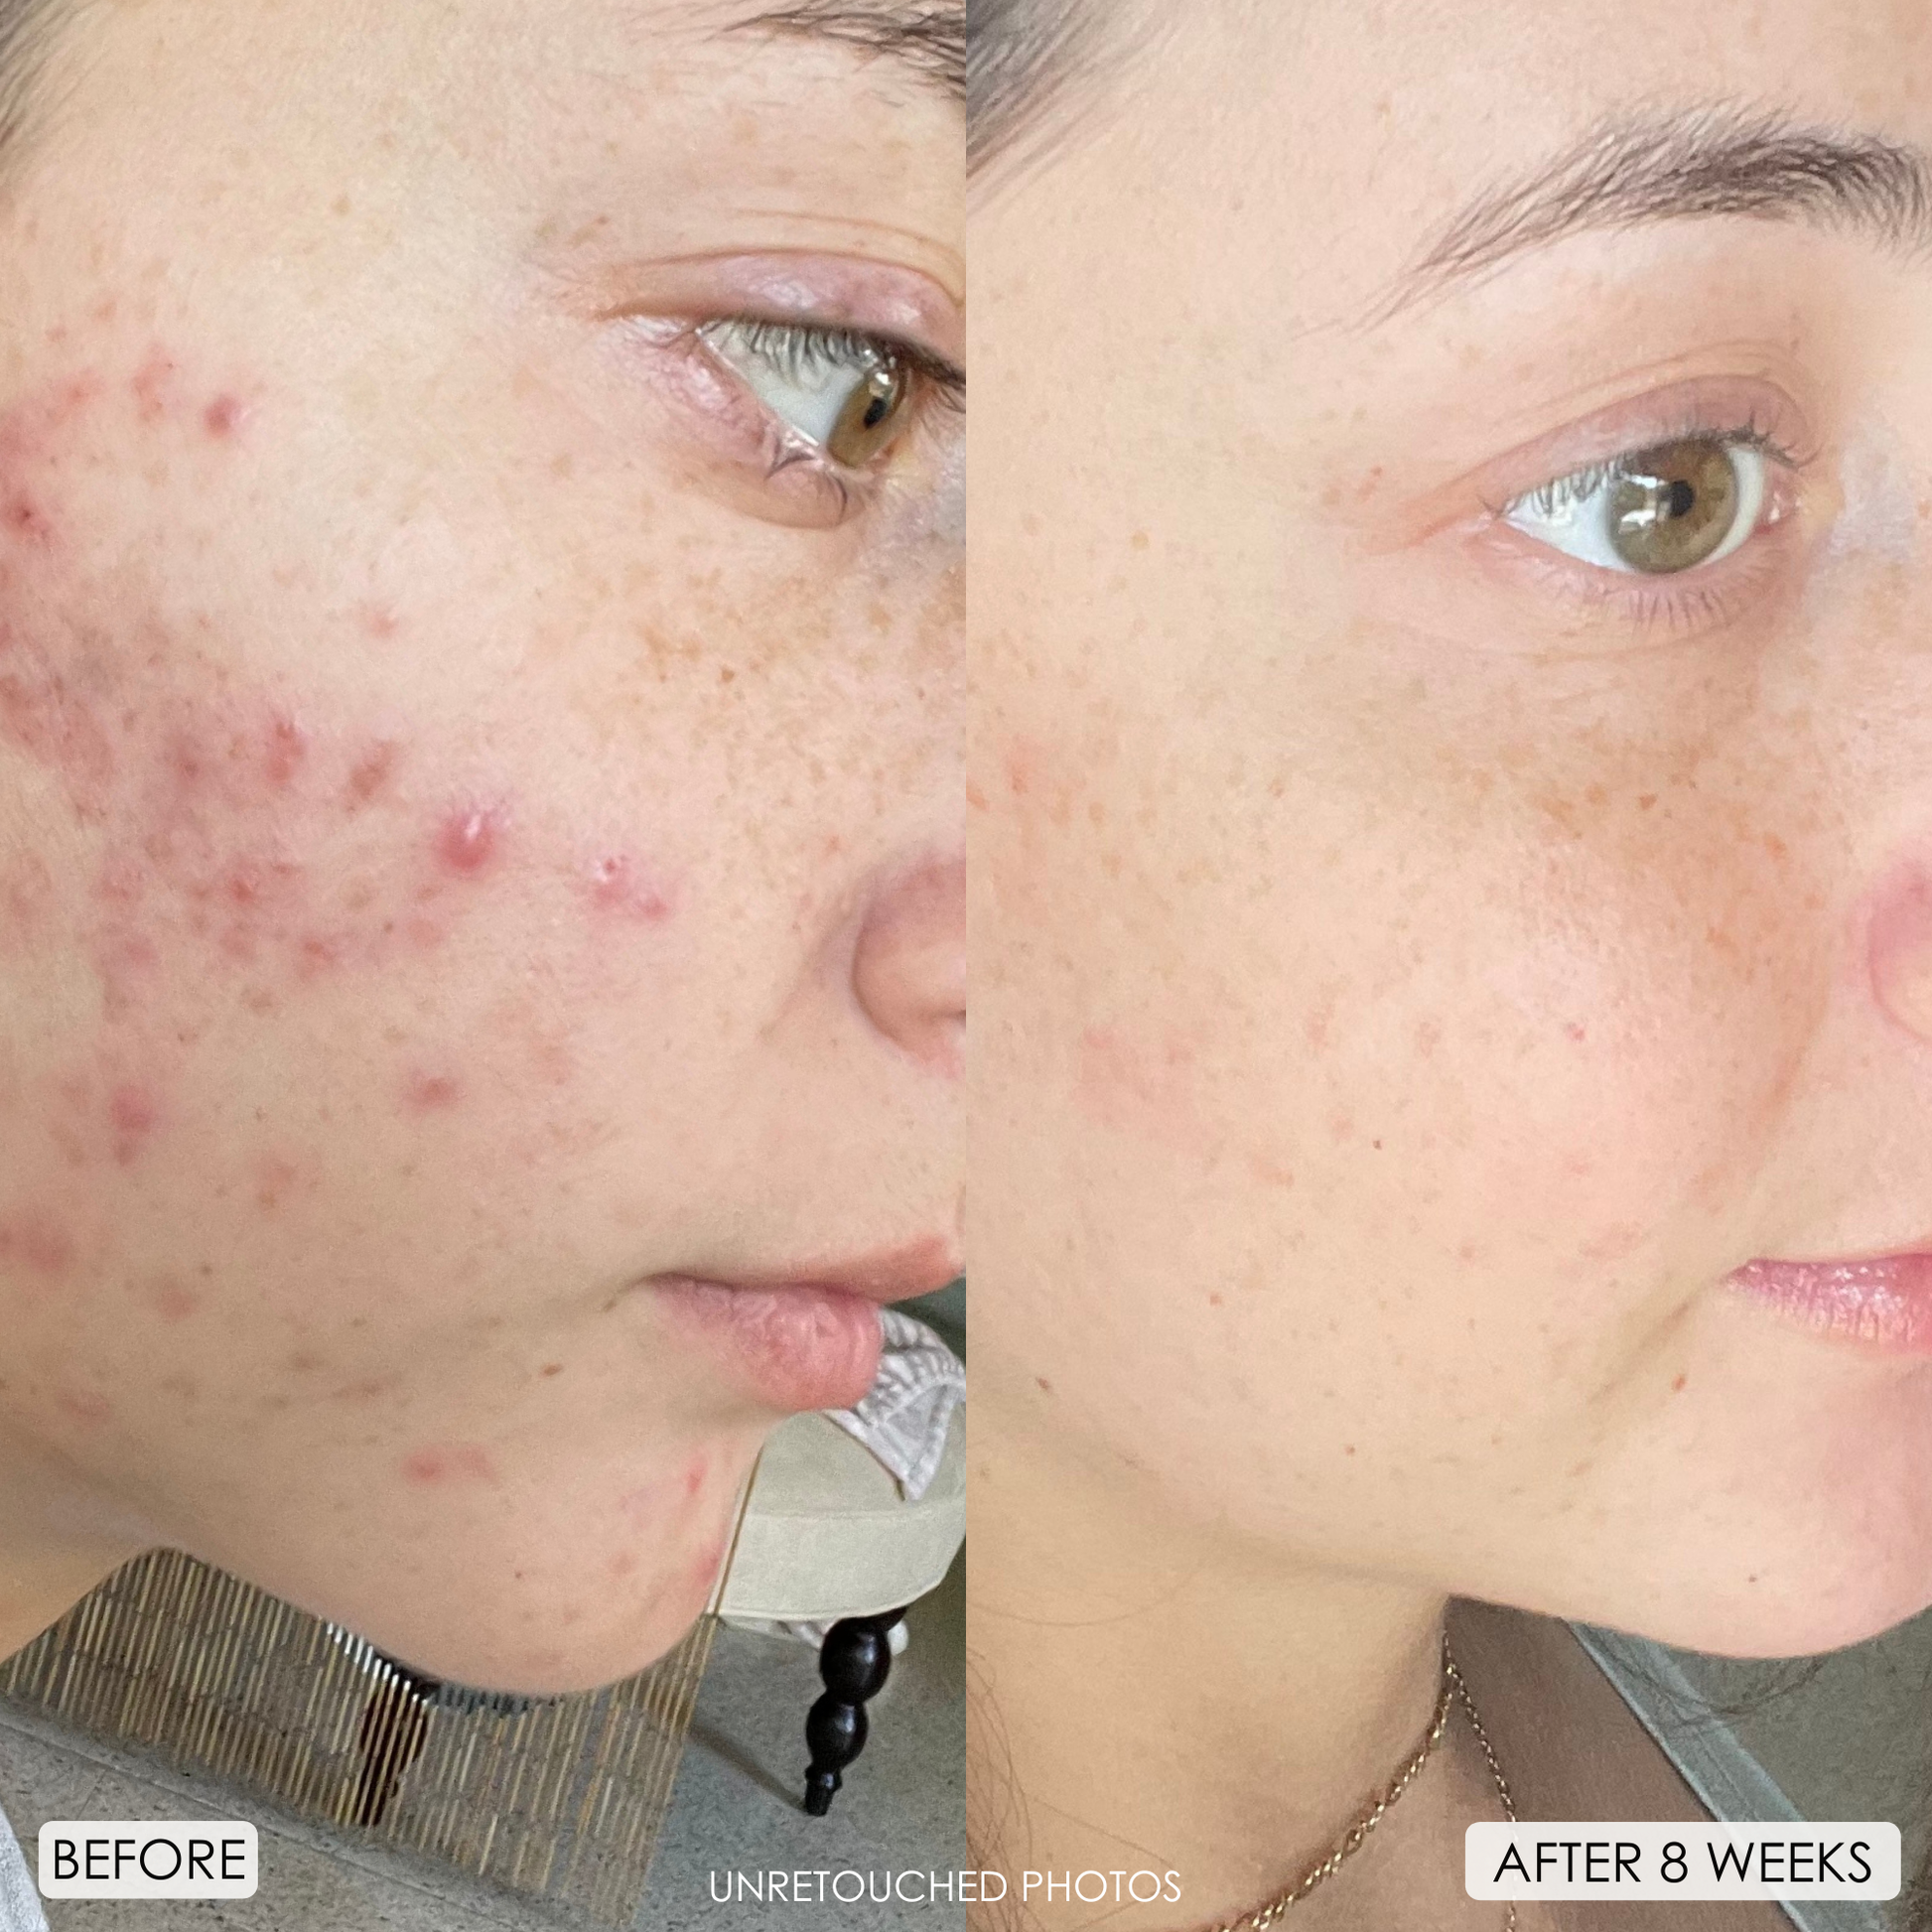 a before and after, showing a young woman with heavy, red acne on her cheeks in the 'before' and then after showing the acne looks like it dissapeared, and her skin looks brighter and more even.